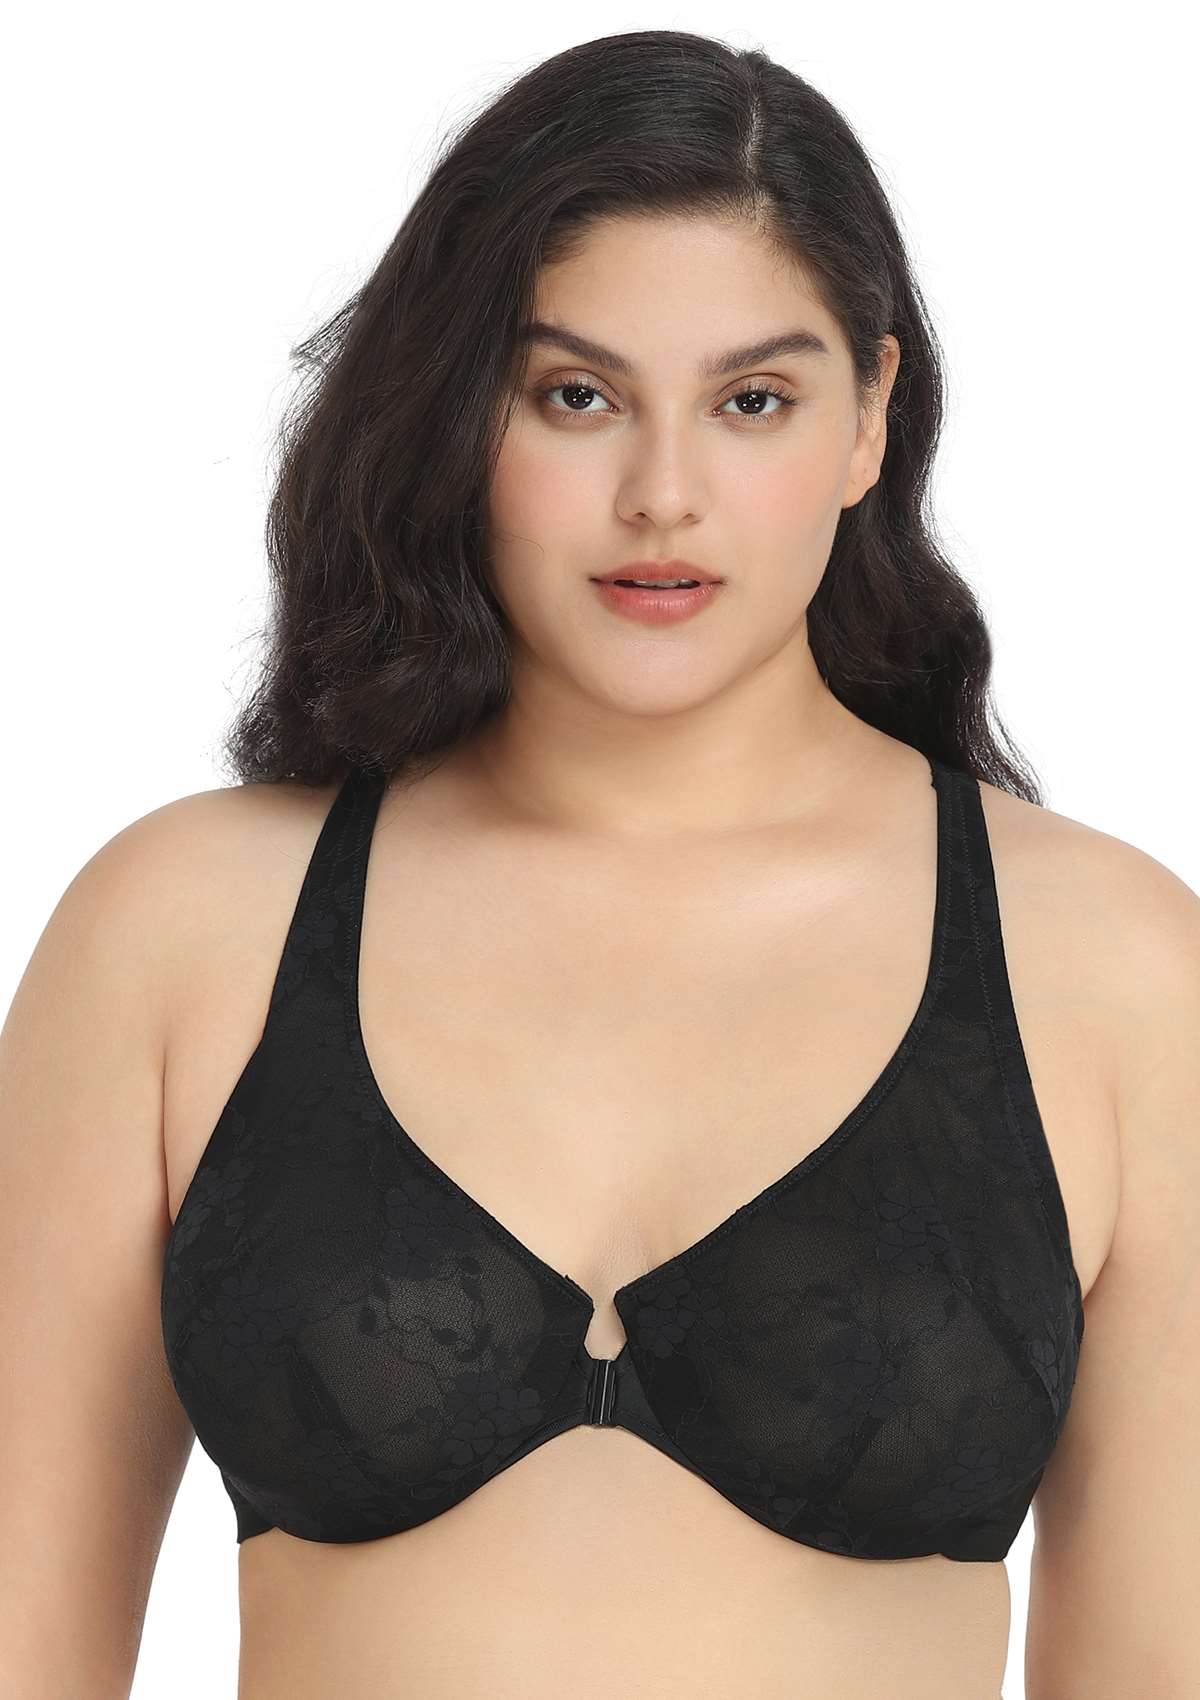 HSIA Spring Romance Front-Close Floral Lace Unlined Full Coverage Bra - Black / 34 / DDD/F